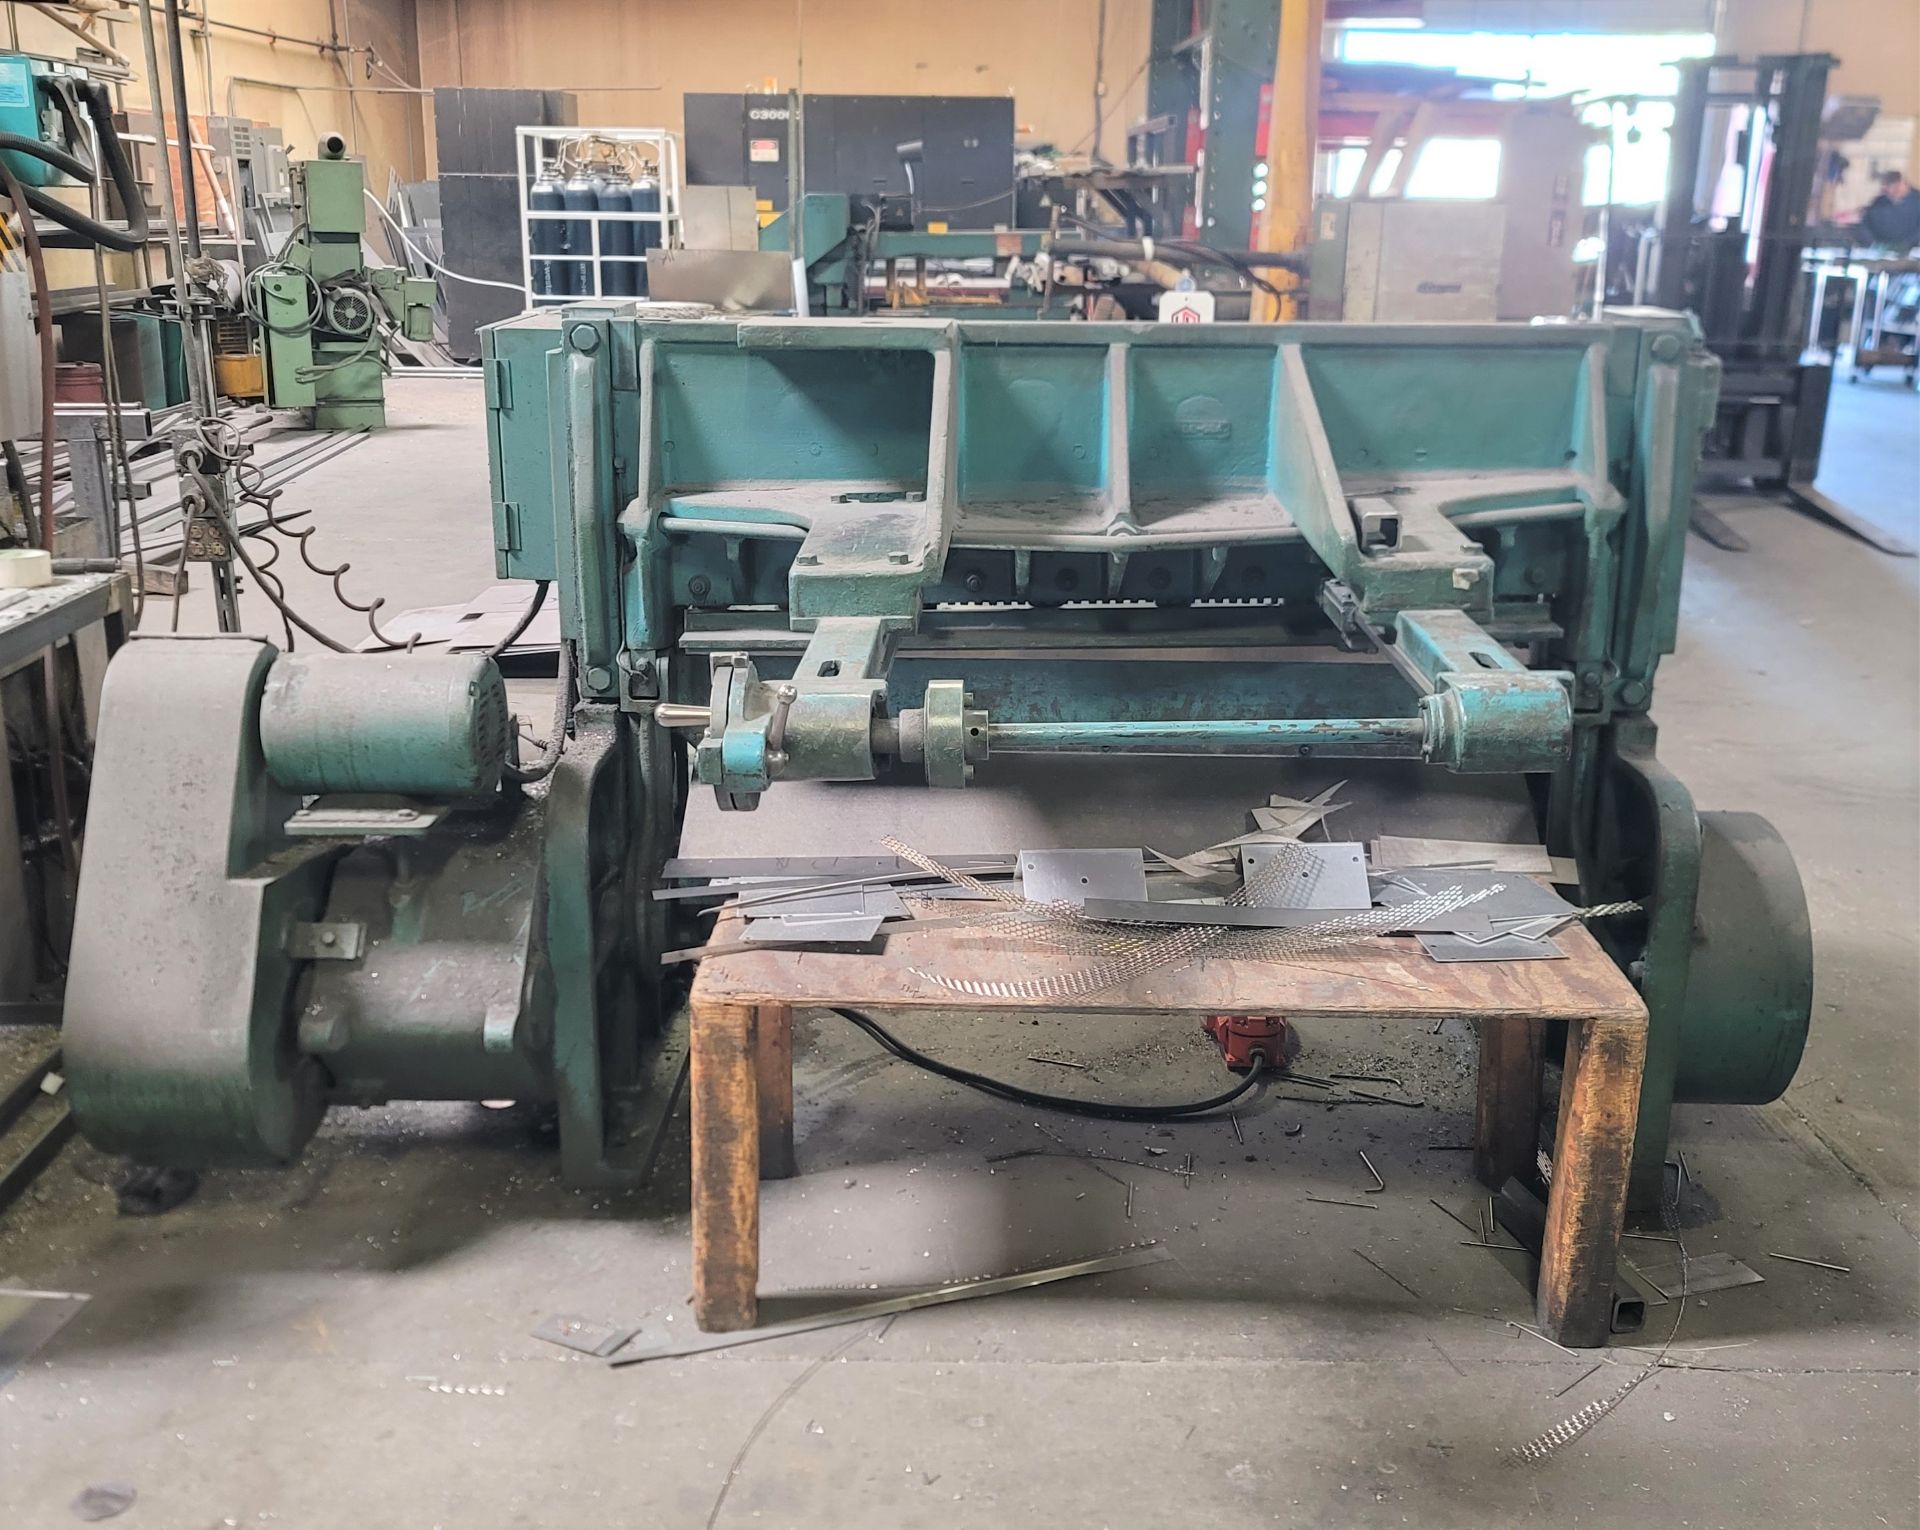 WYSONG 52" POWER SHEAR, MODEL 1252-HD, 10 GAGE X 4' CAPACITY, MECHANICAL, SQUARING ARM, S/N P13- - Image 3 of 5